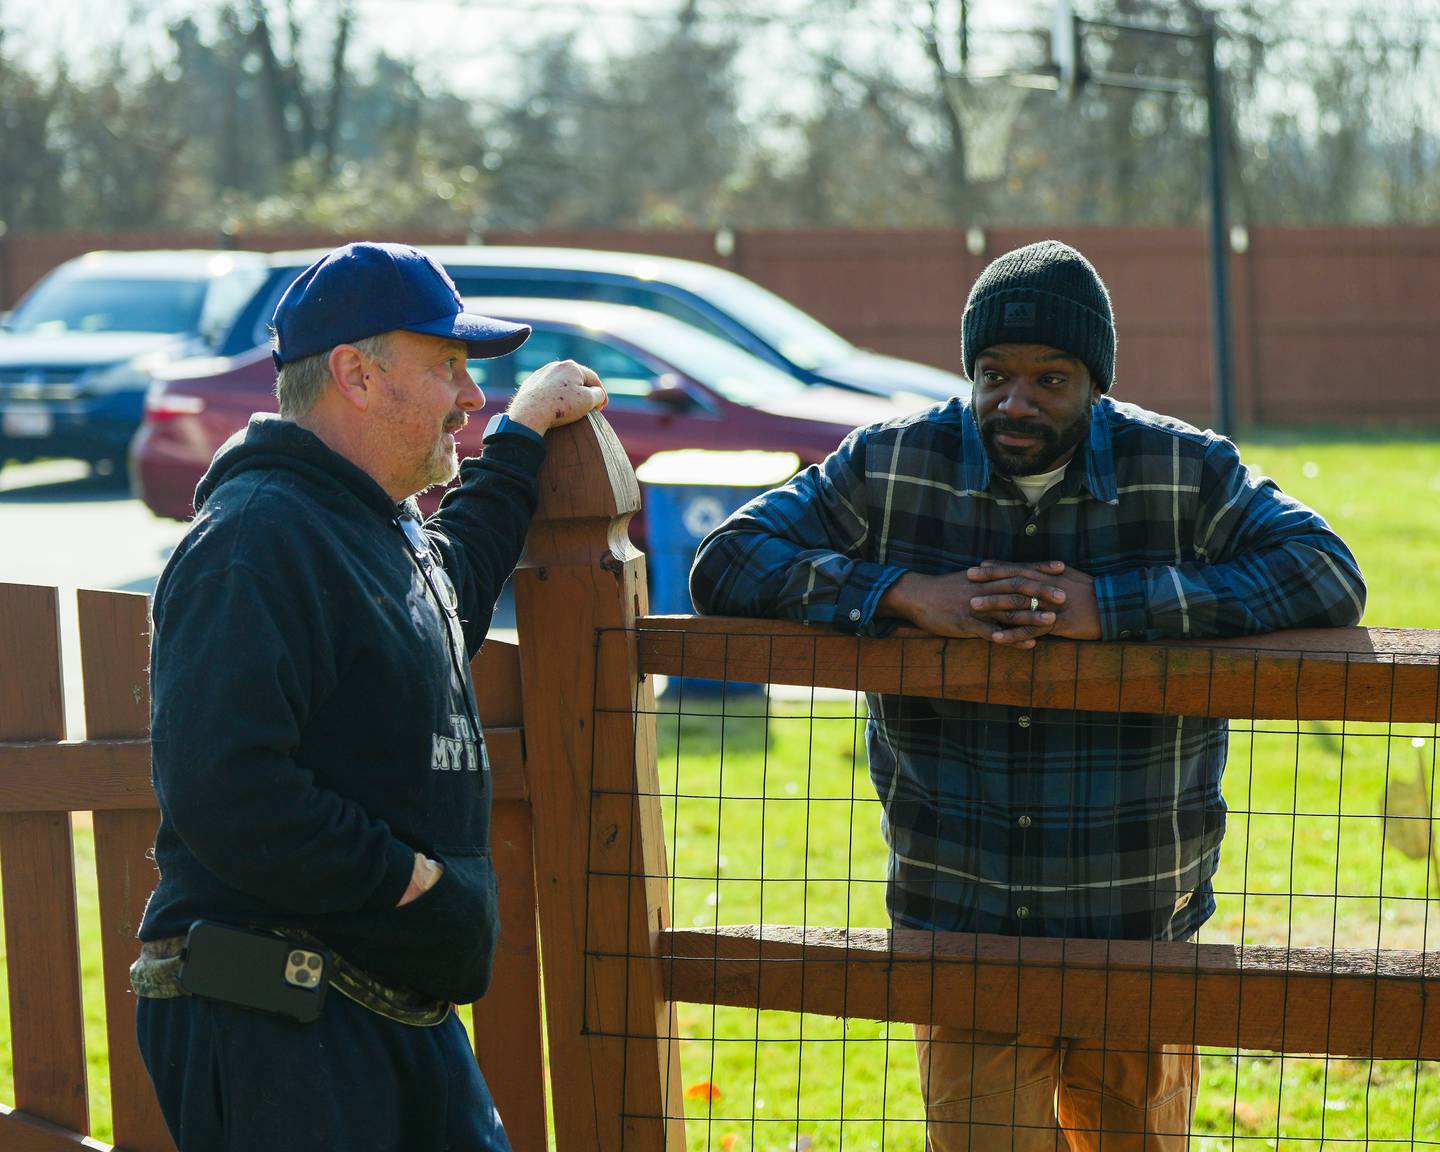 Two men talk over a wooden gate as they wait for the potential capture of an injured stray pitbull.